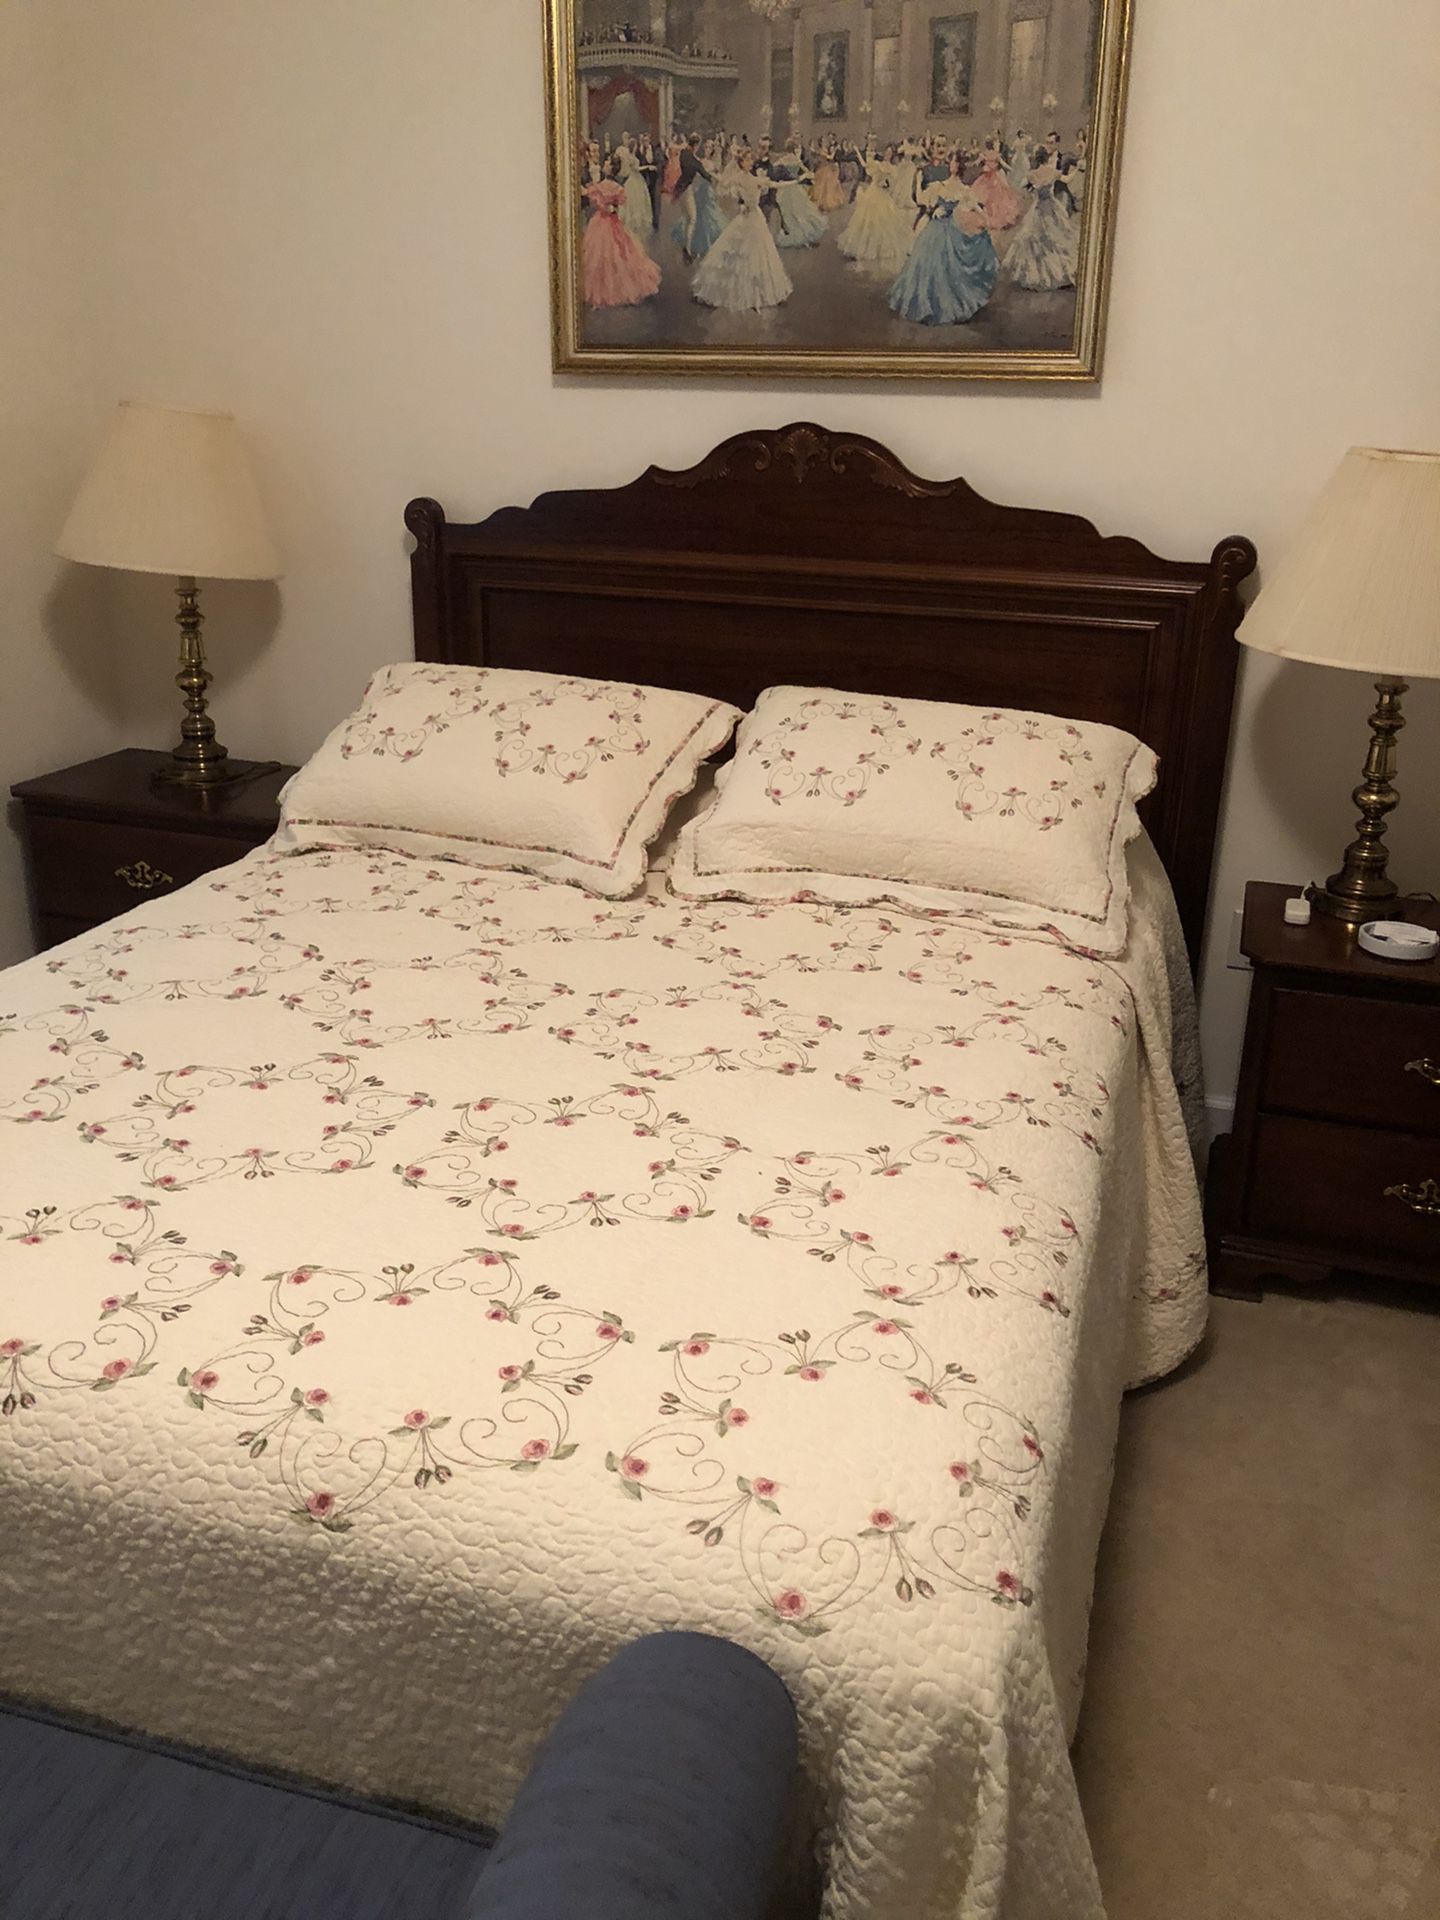 Queen size wooden bed, headboard with frame